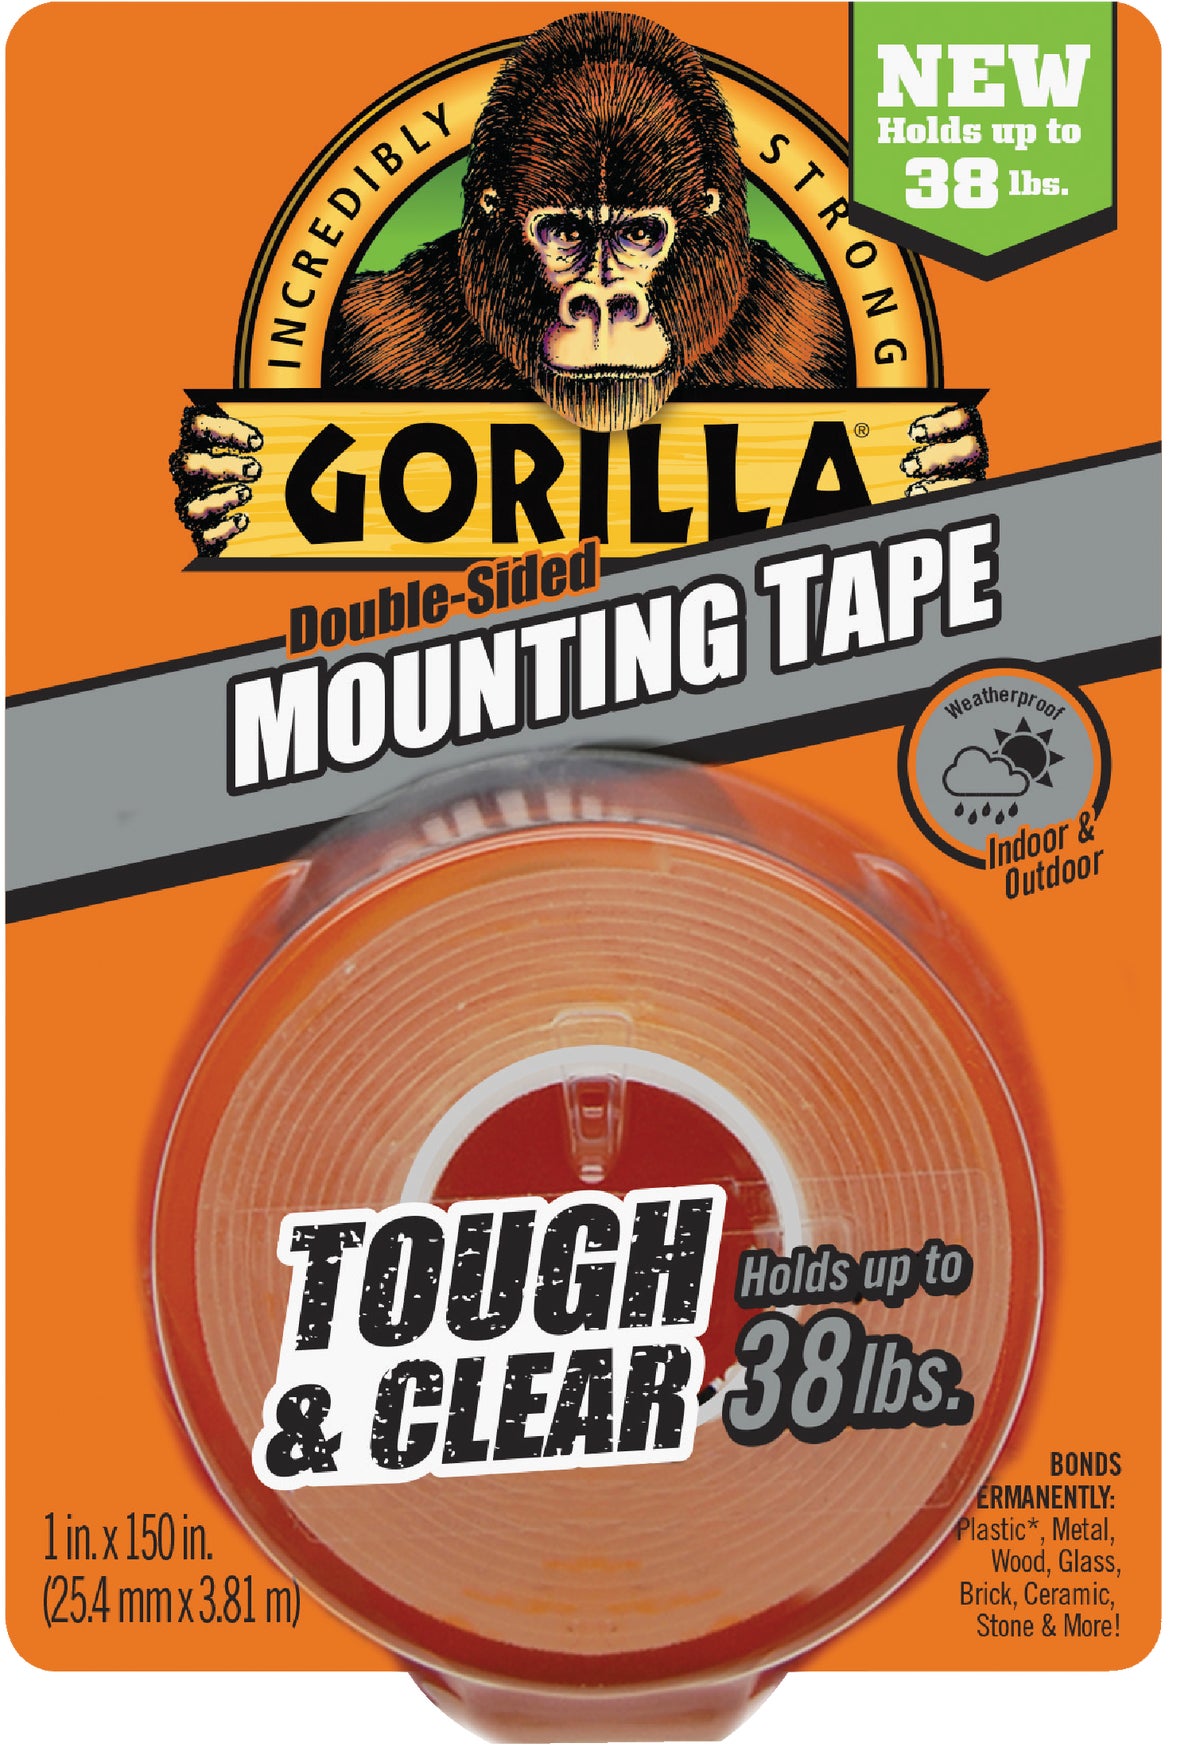 Buy Gorilla Glue Mounting Squares Clear